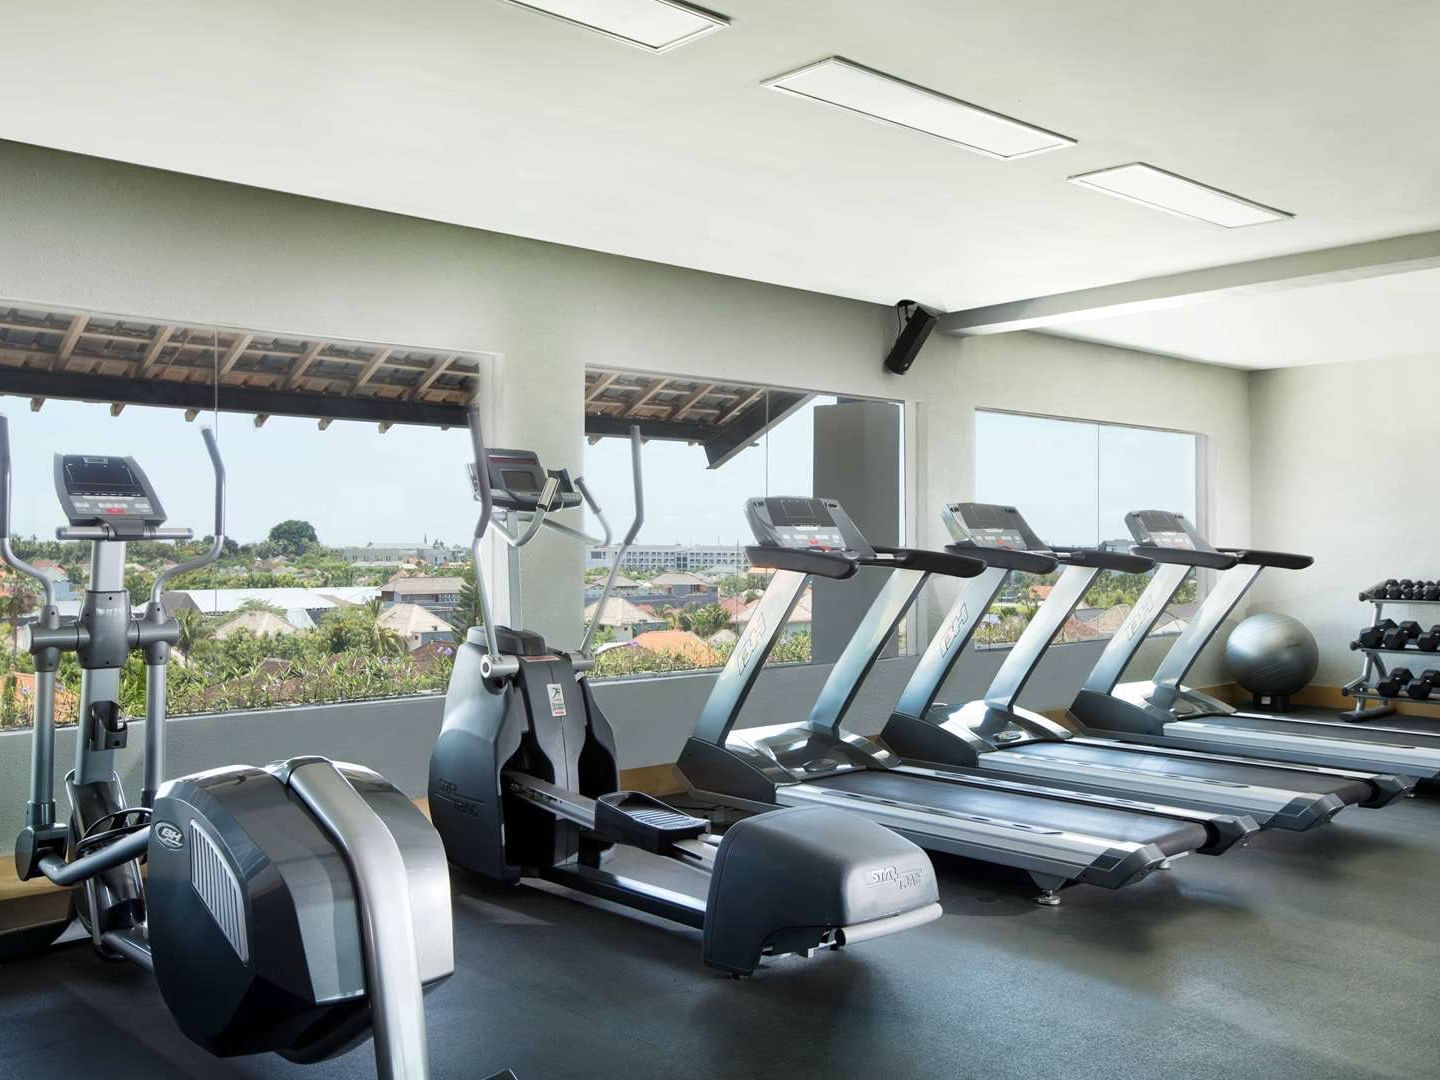 Treadmills lined in Gym at U Hotels and Resorts